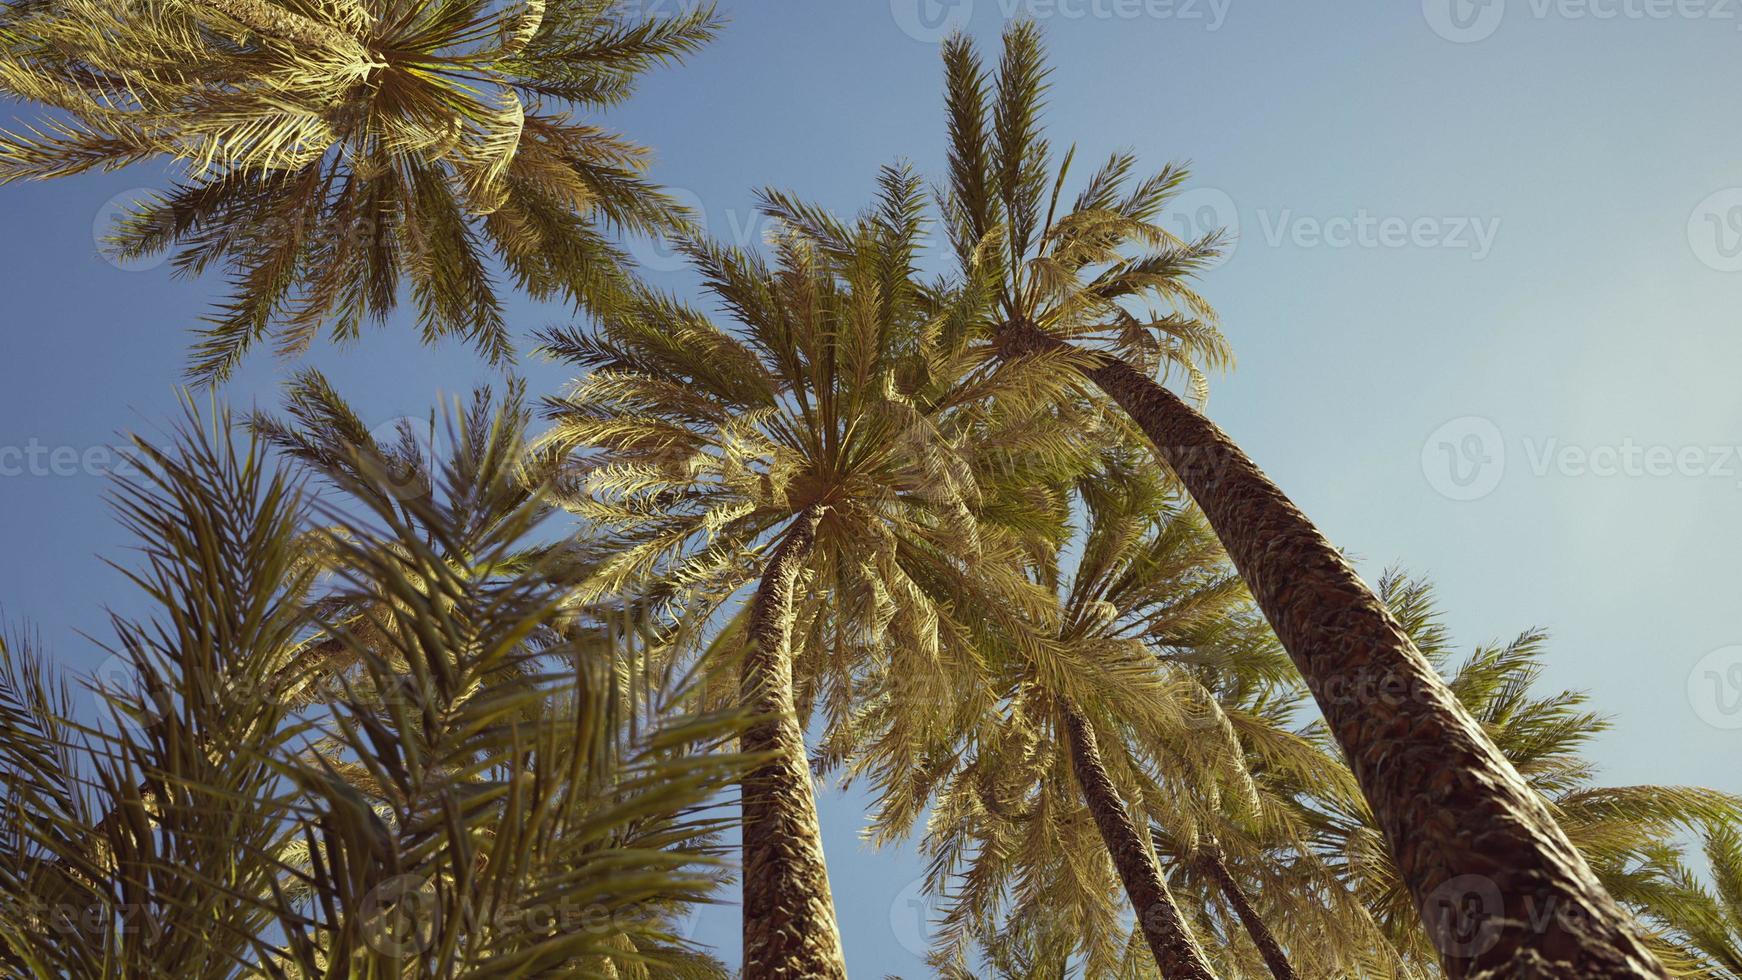 view of the palm trees passing by under blue skies photo